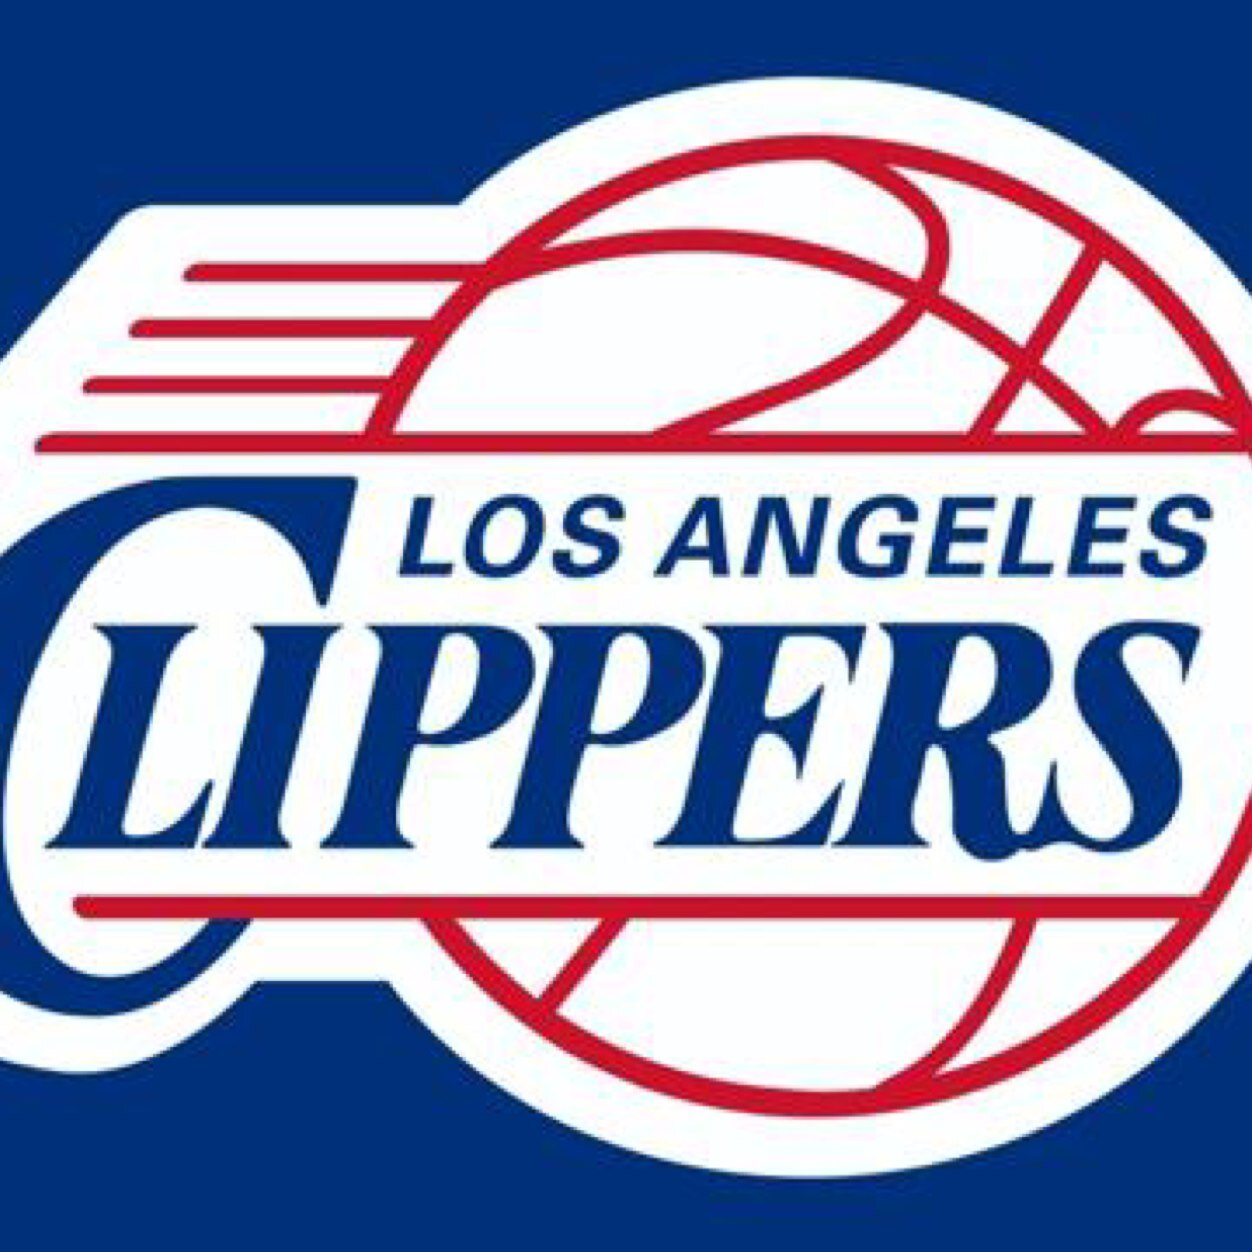 Follow me please! Clippers forever!!'